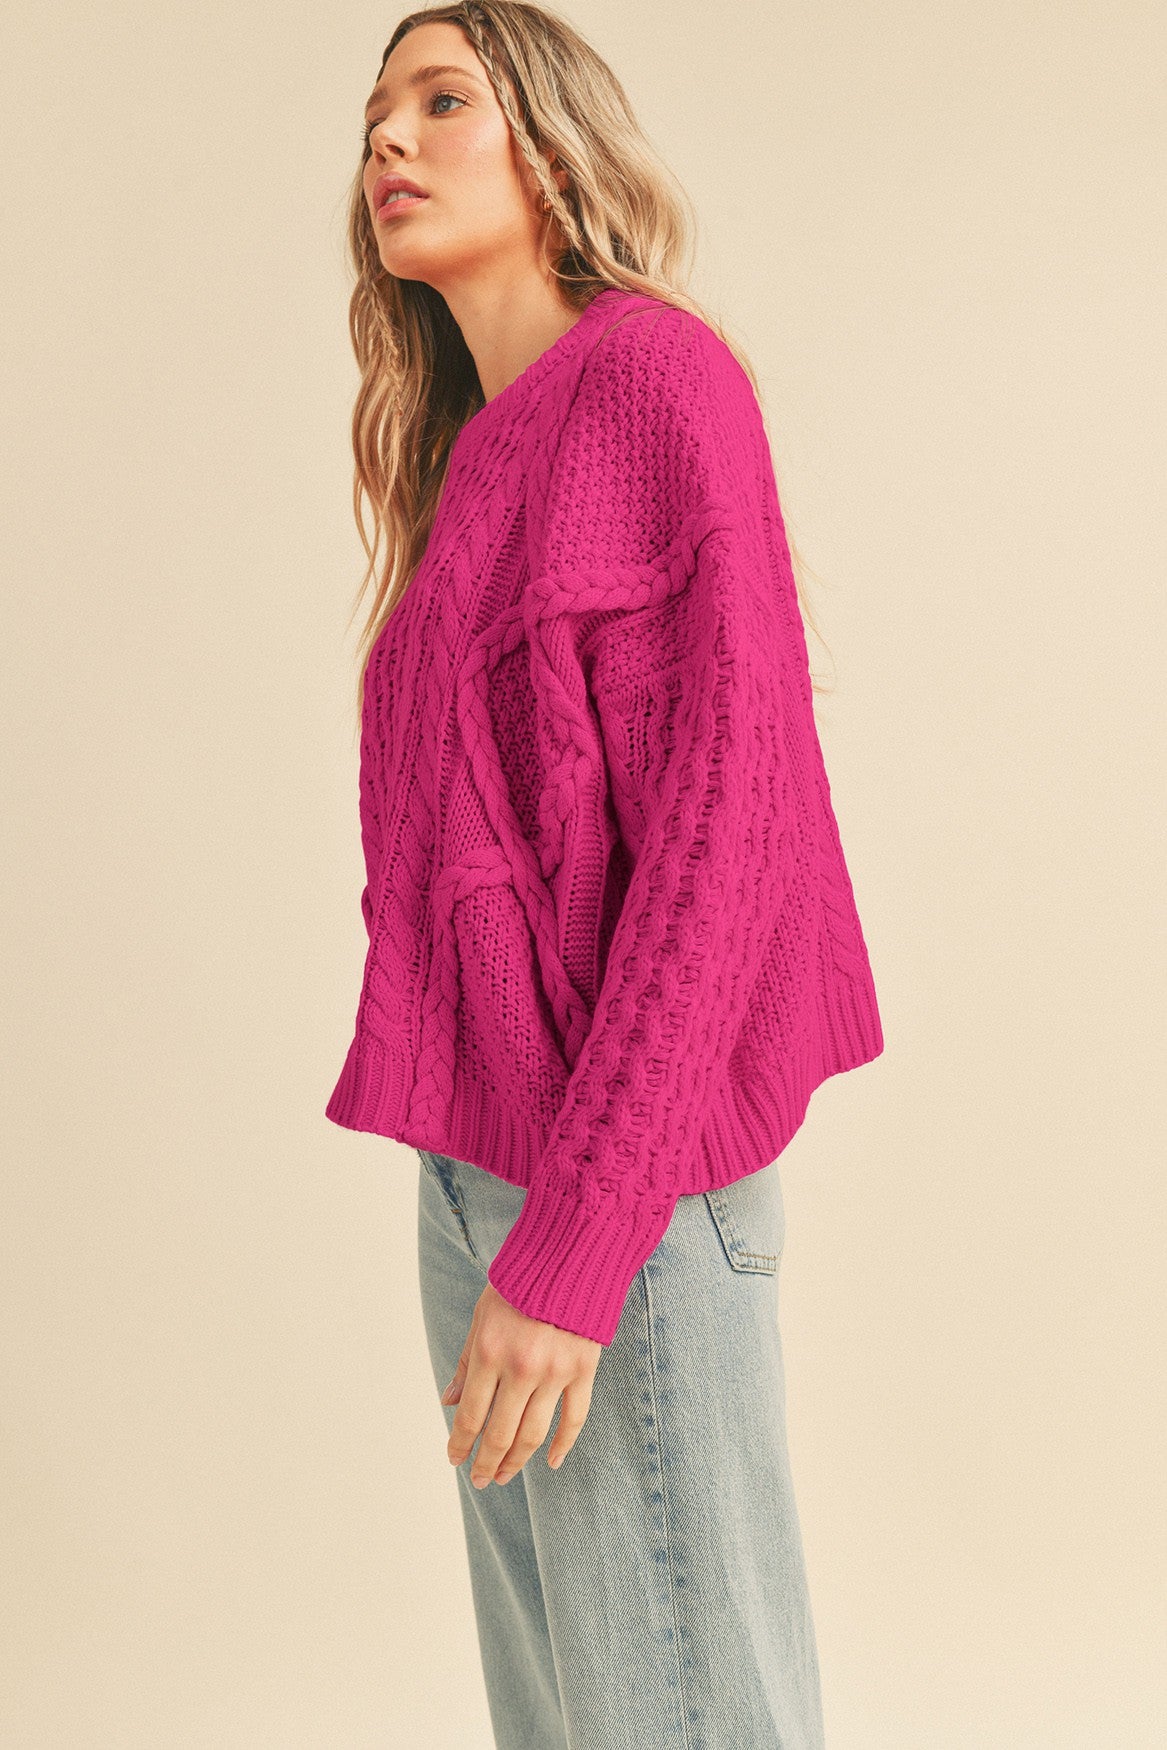 Braided Cable Knit Sweater Fuschia